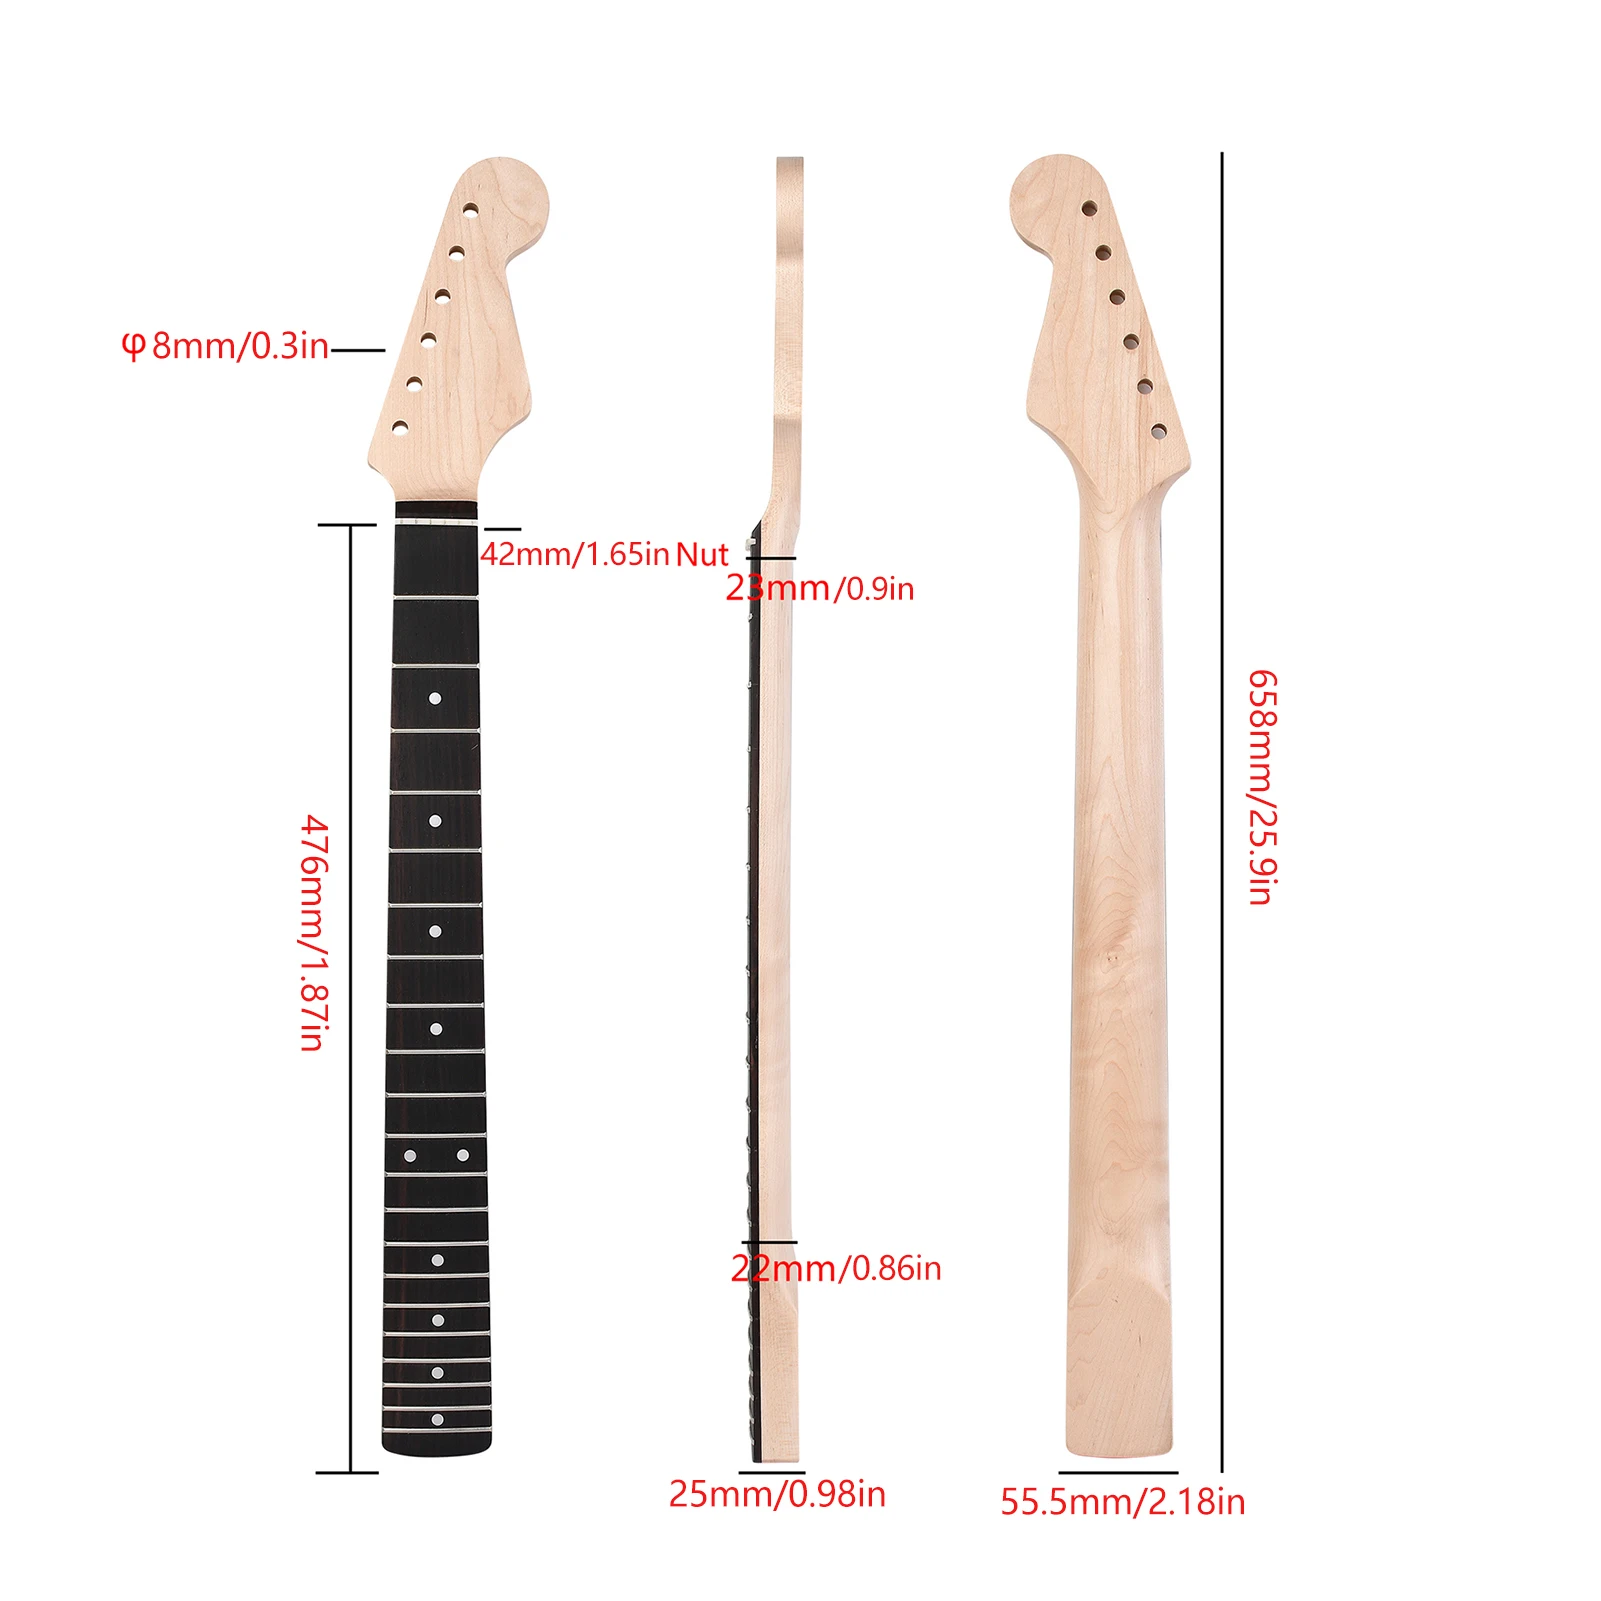 Cables Electric Guitar Neck Rosewood Fingerboard 6 String Guitar Neck 9.5inch Heavy Duty Maple Wood Guitar Practice Neck For ST Style